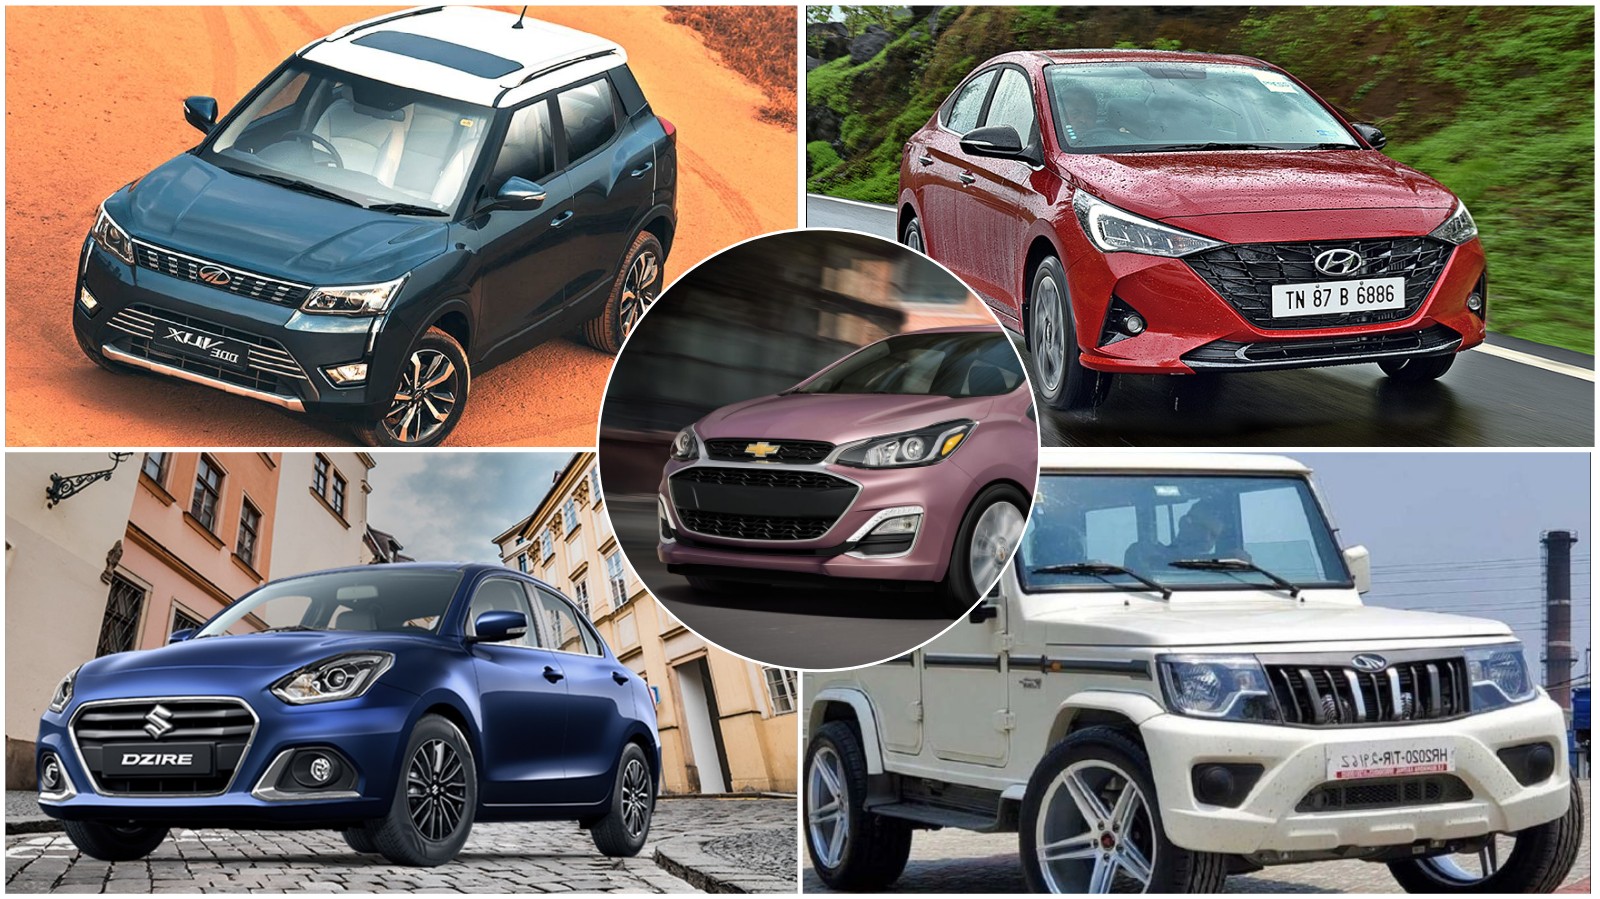 Best Cars Under 10 Lakhs in India